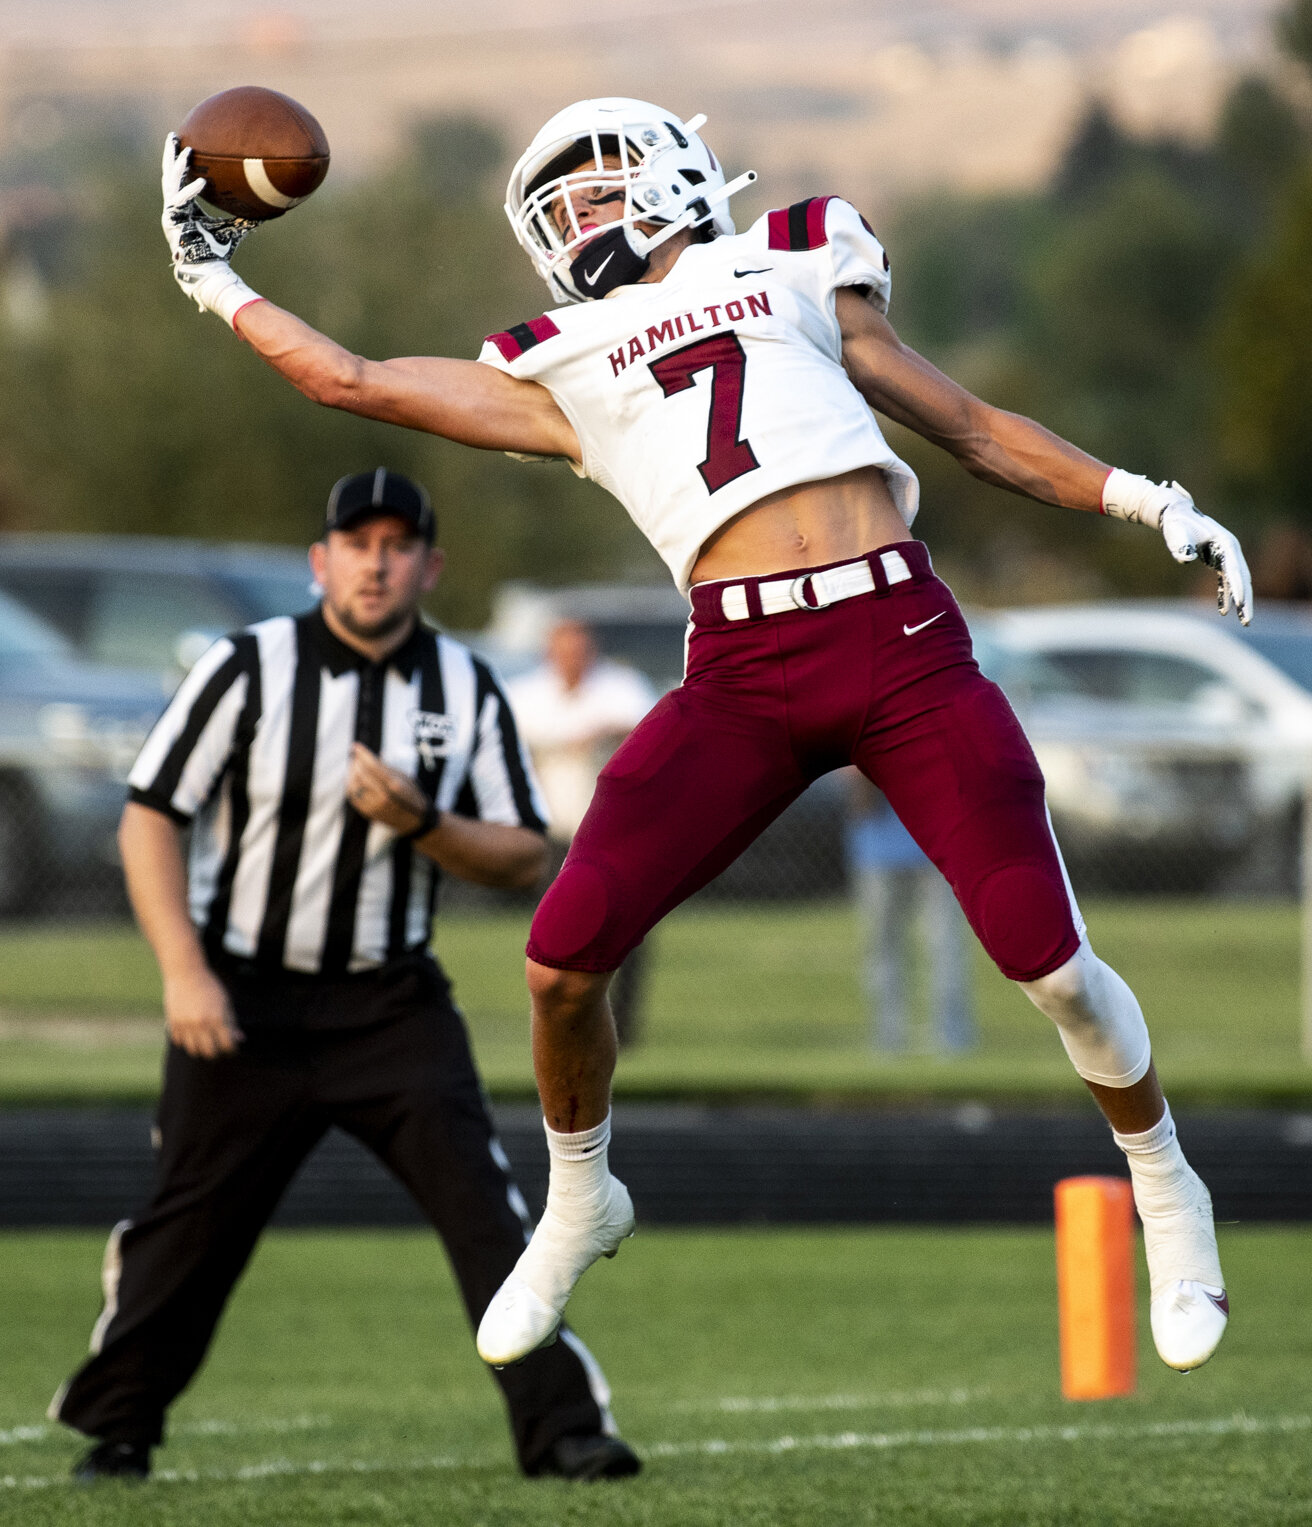  Hamilton’s Jaiden Klemundt makes a one-handed catch in the end zone for a touchdown during the Broncs’ game against Corvallis, Sept. 4, 2020 in Corvallis, Mont.. The Broncs defeated the Blue Devils, 53-6. 